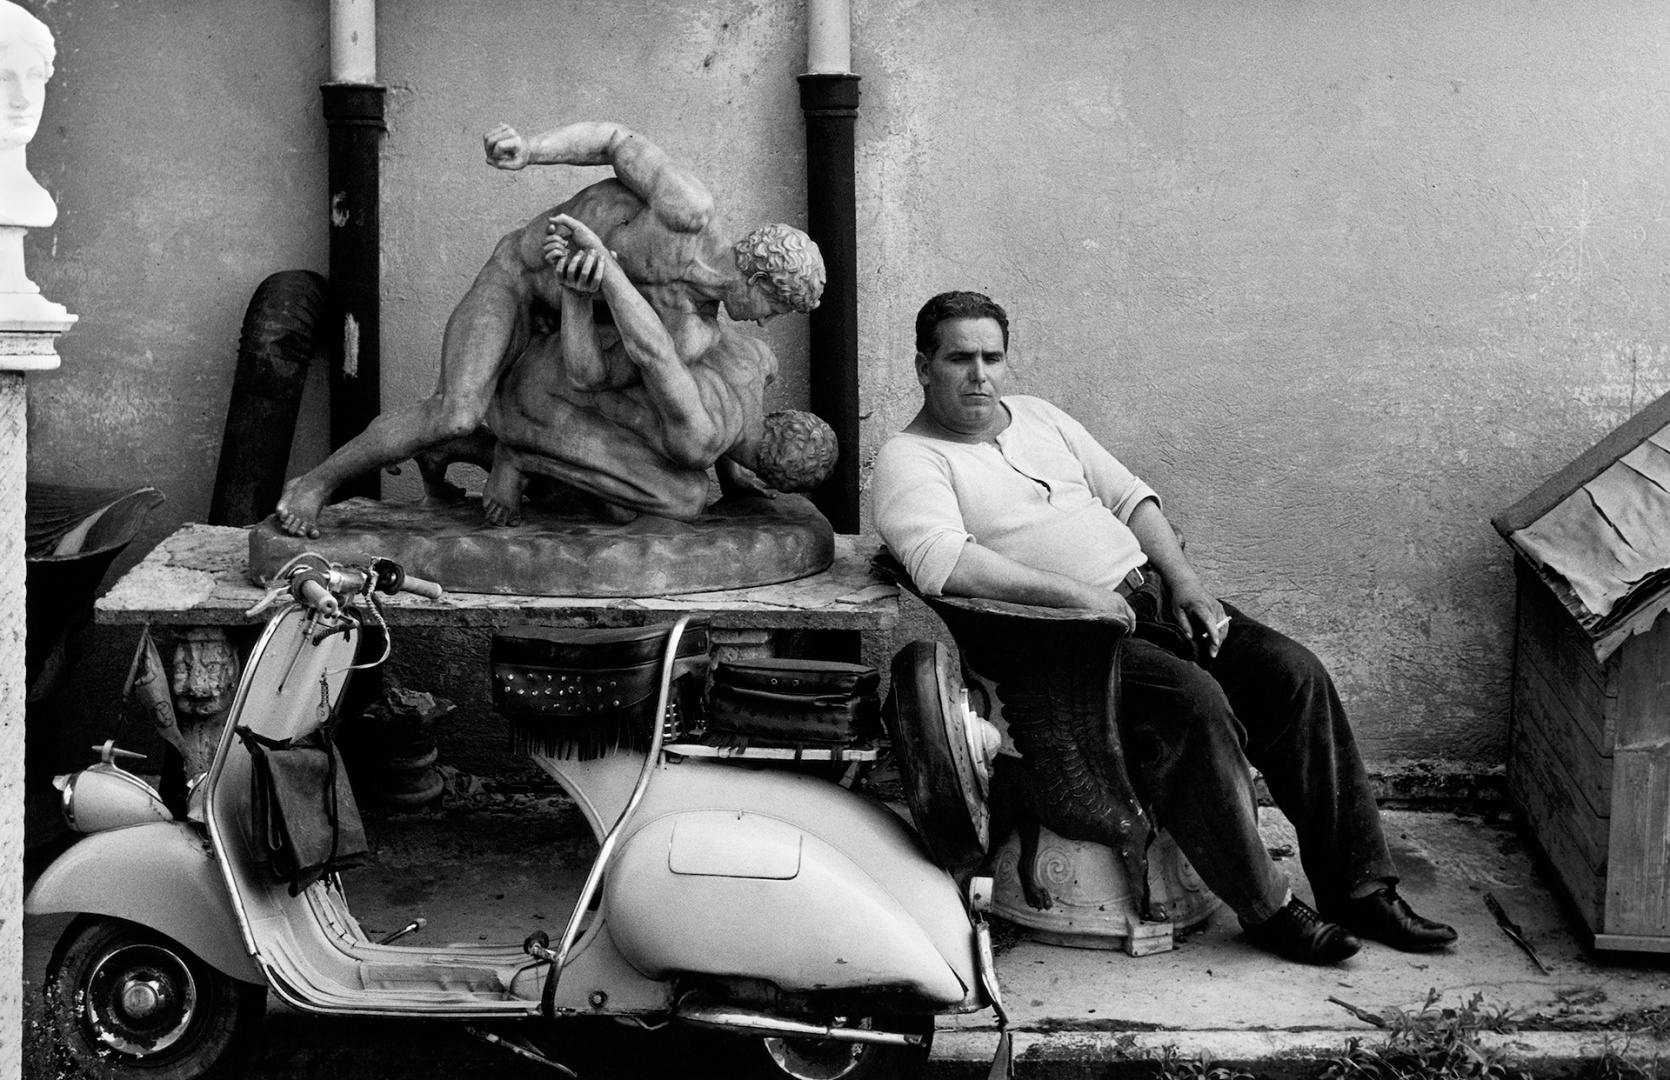 Black and white photograph of a man sat on a chair in Rome next to a statue, as part of the new William Klein exhibition called YES at the ICP